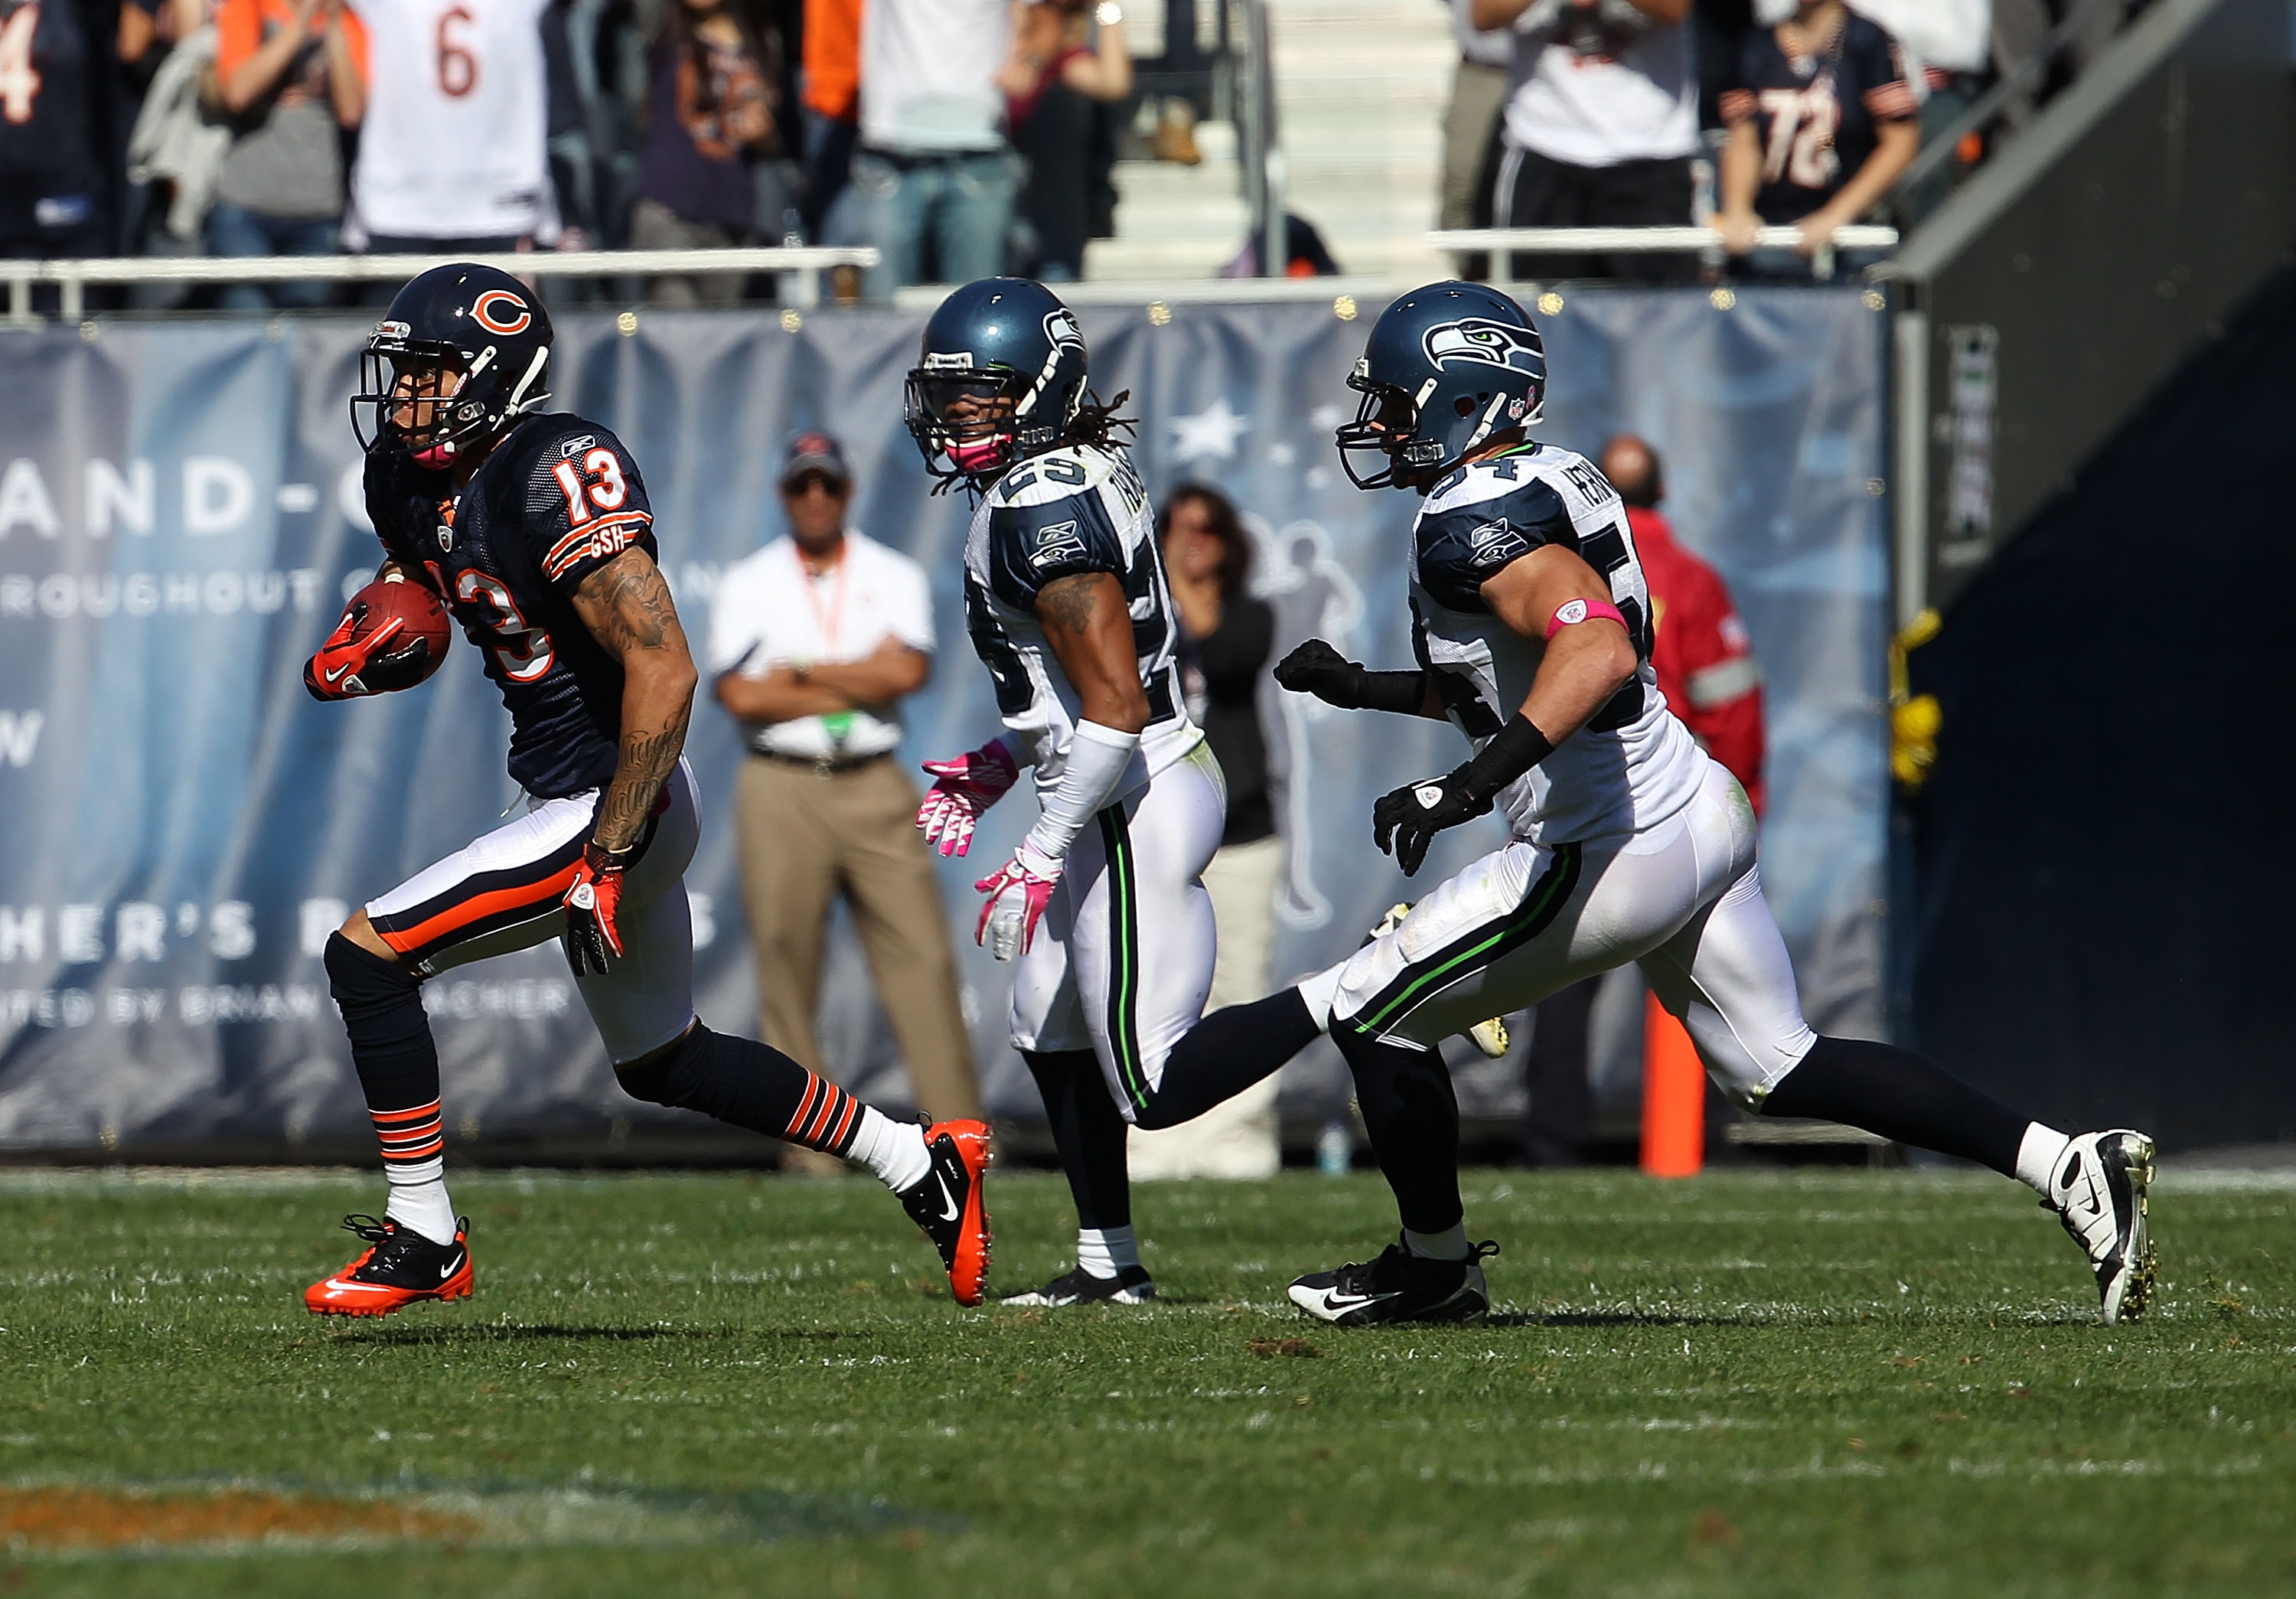 CHICAGO - OCTOBER 17: Johnny Knox #13 of the Chicago Bears runs past Walter Thurmond #28 and Will Herring #54 of the Seattle Seahawks at Soldier Field on October 17, 2010 in Chicago, Illinois. The Seahawks defeated the Bears 23-30. (Photo by Jonathan Dani